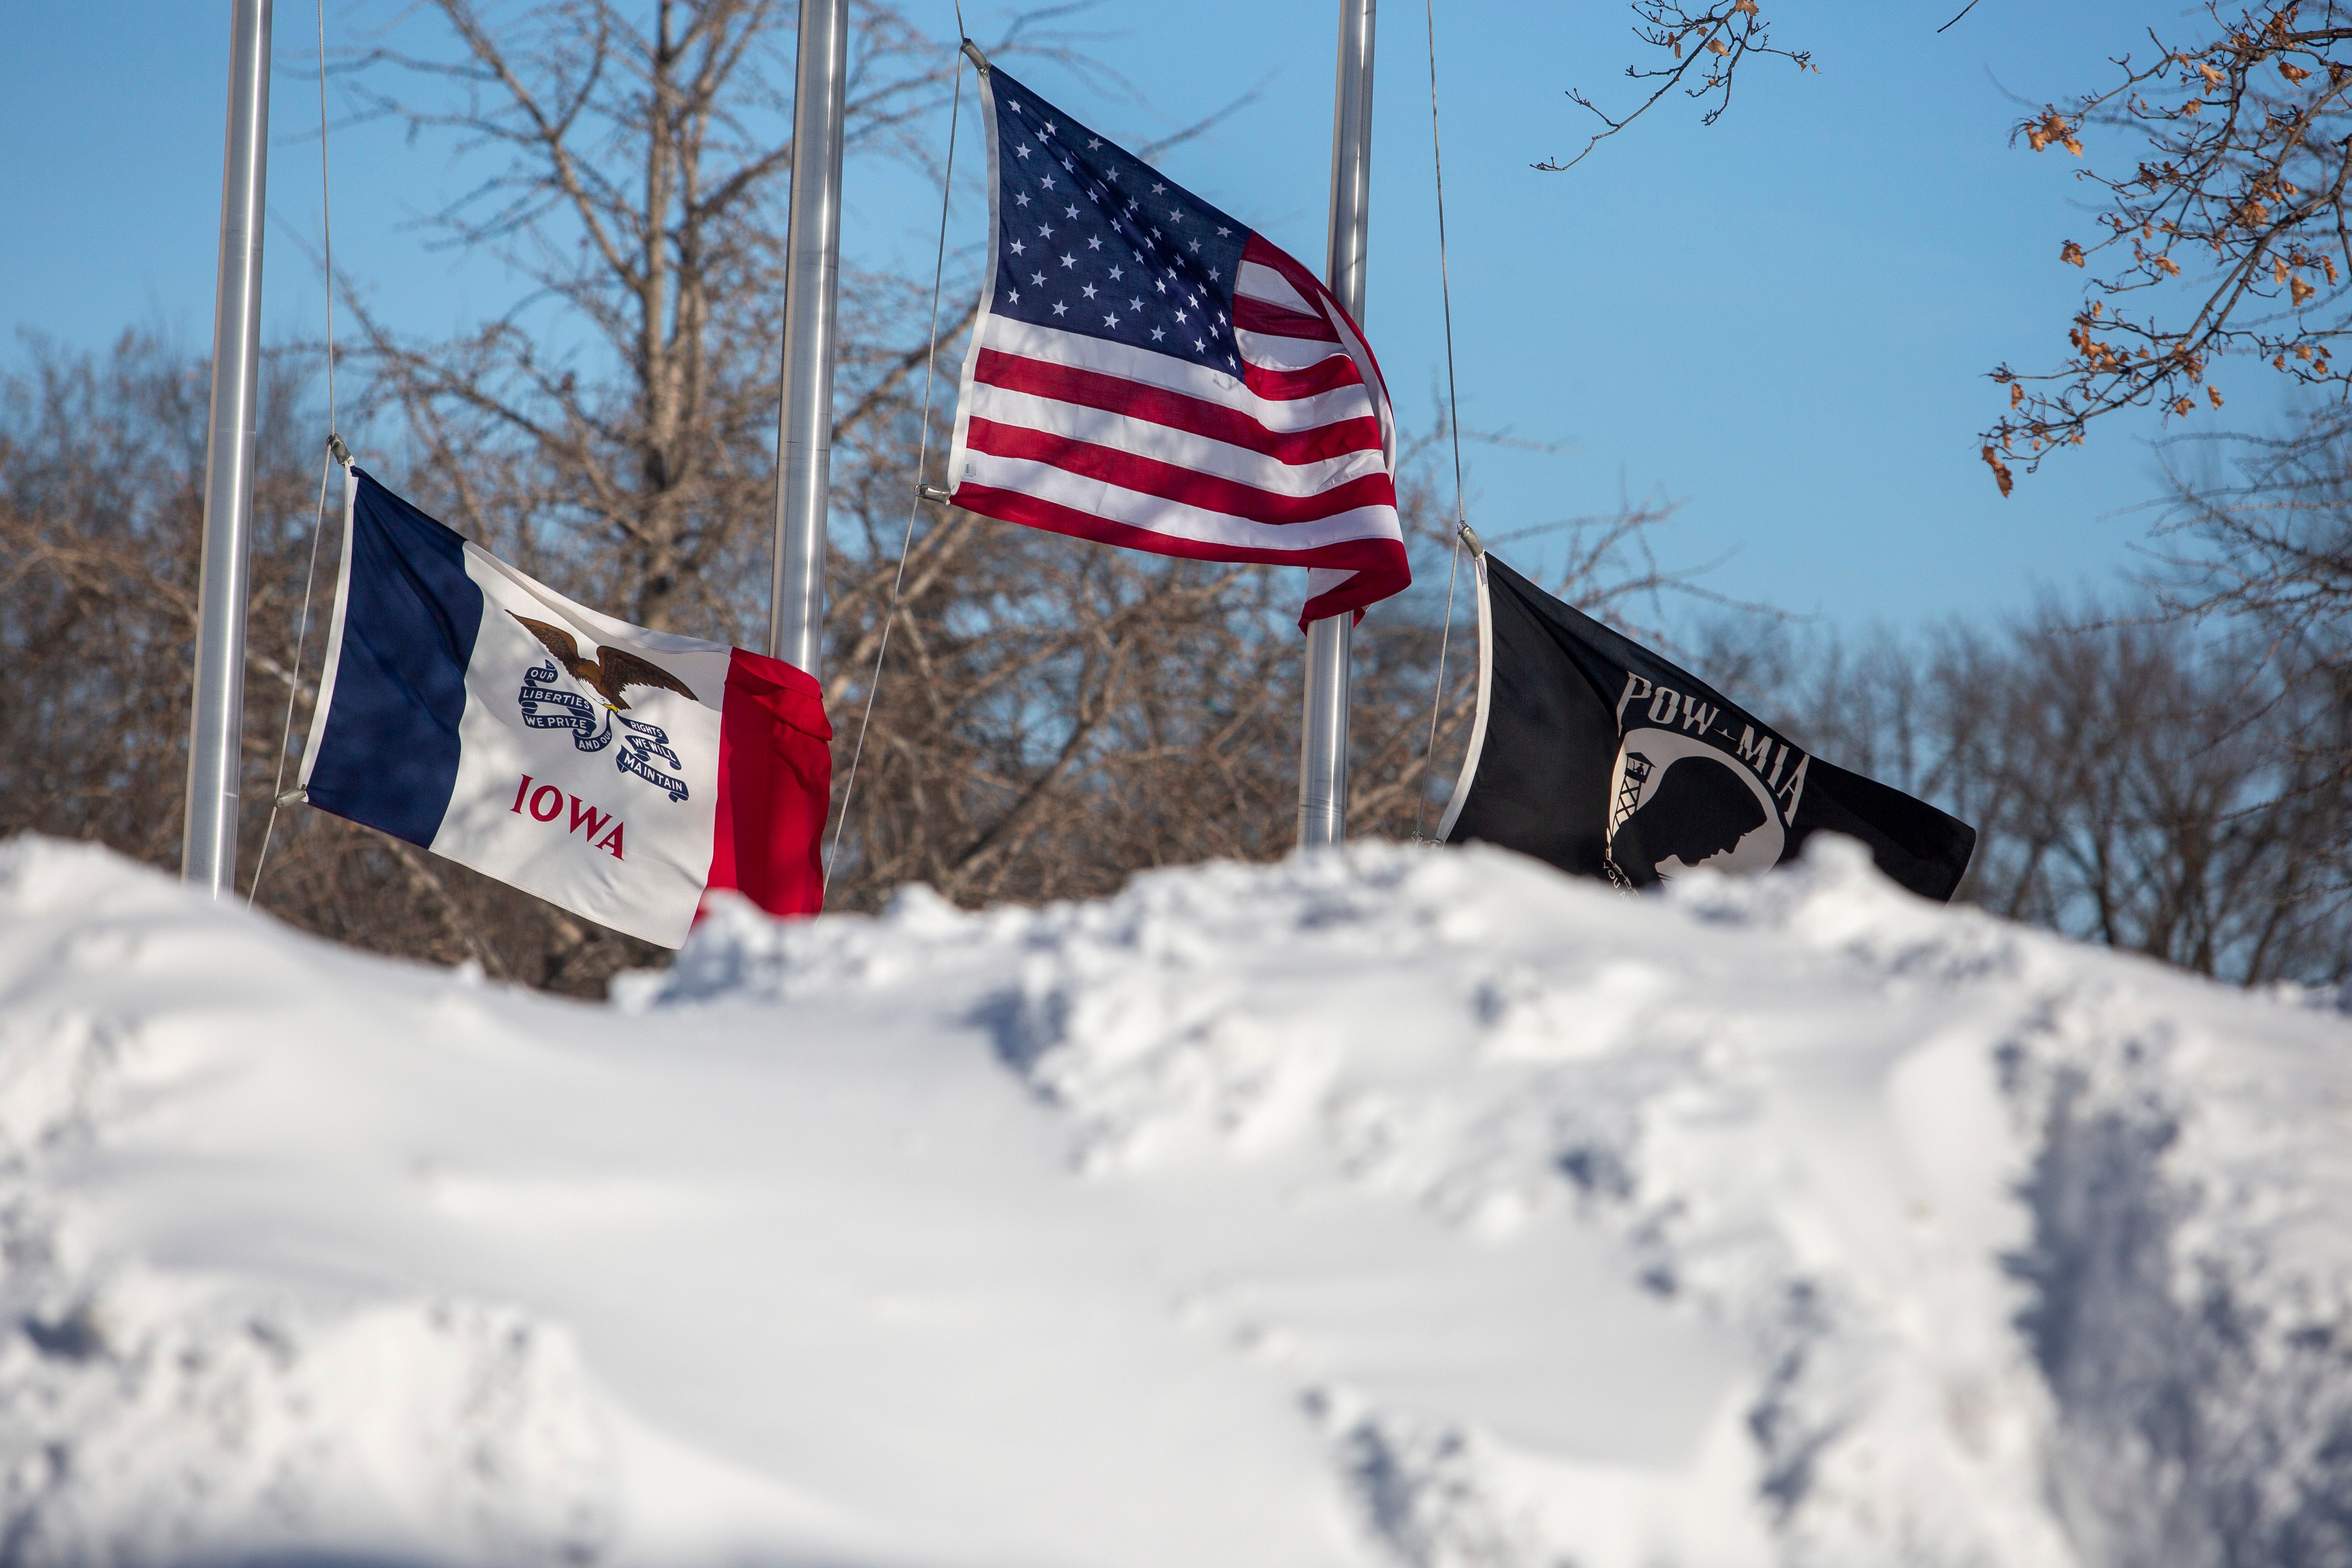 Flags surrounded by snow piles during a winter storm ahead of the Iowa caucus in Adel, Iowa, US, on Sunday, Jan. 14, 2024. Iowans on Monday will cast the first votes in the 2024 presidential nominating process during a caucus that's likely to show depressed turnout because of historically frigid weather.